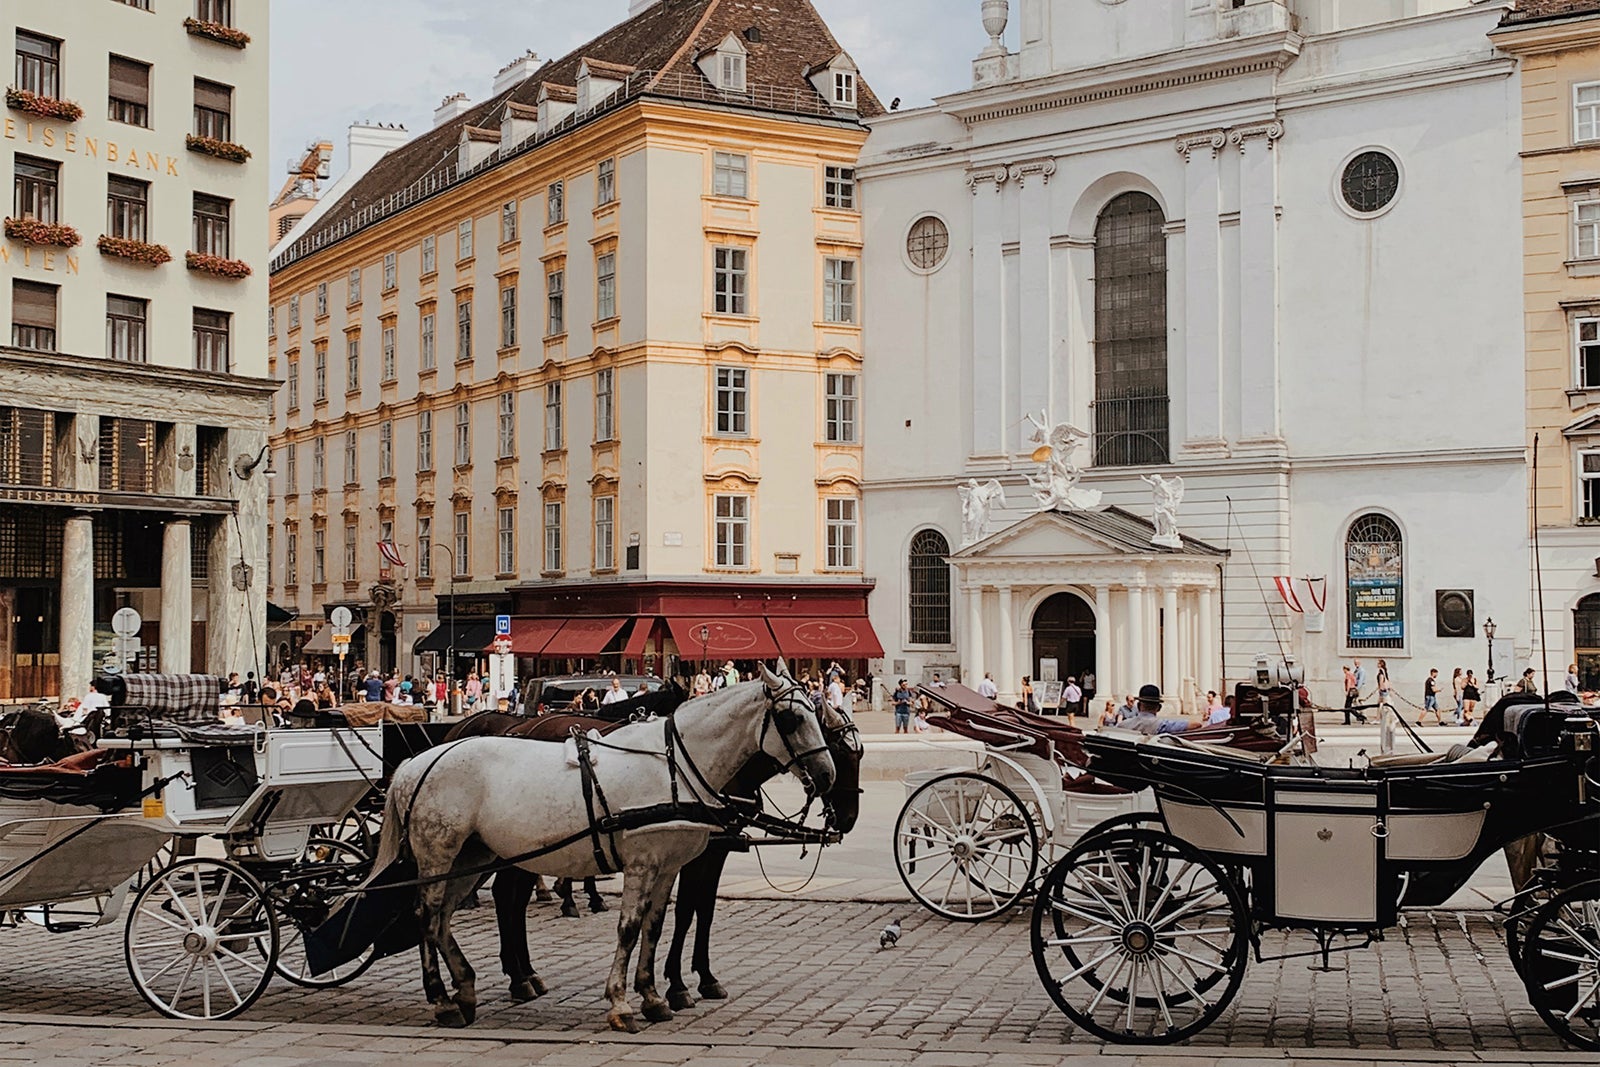 horse-drawn carriages in the square in front of the Park Hyatt Vienna